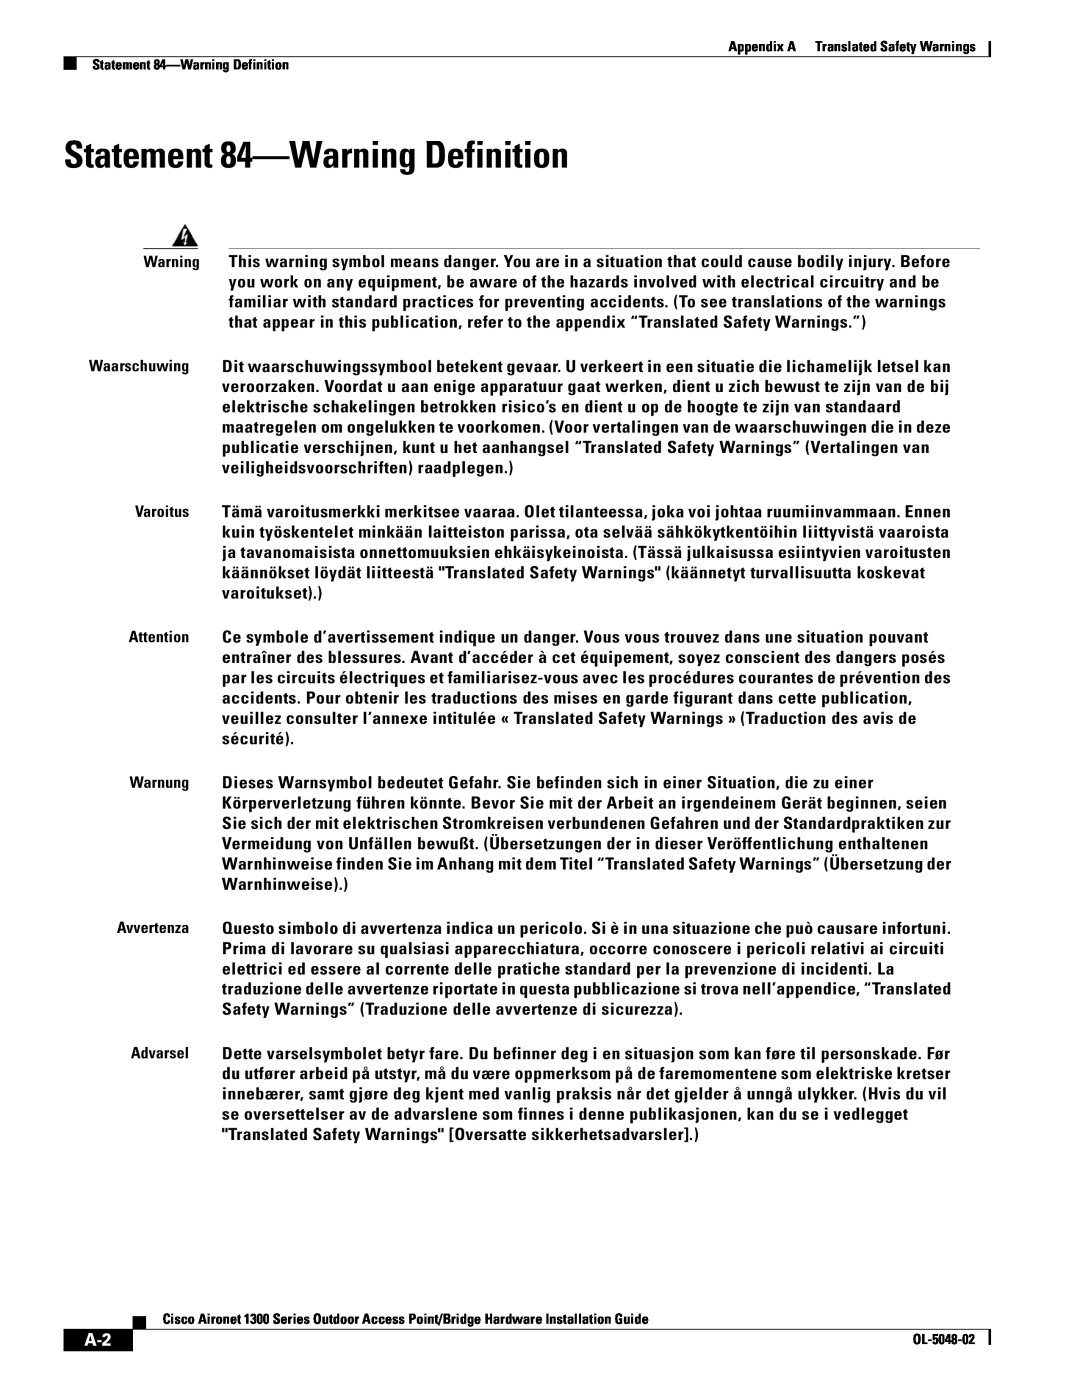 Cisco Systems 1300 Series manual Statement 84-Warning Definition 